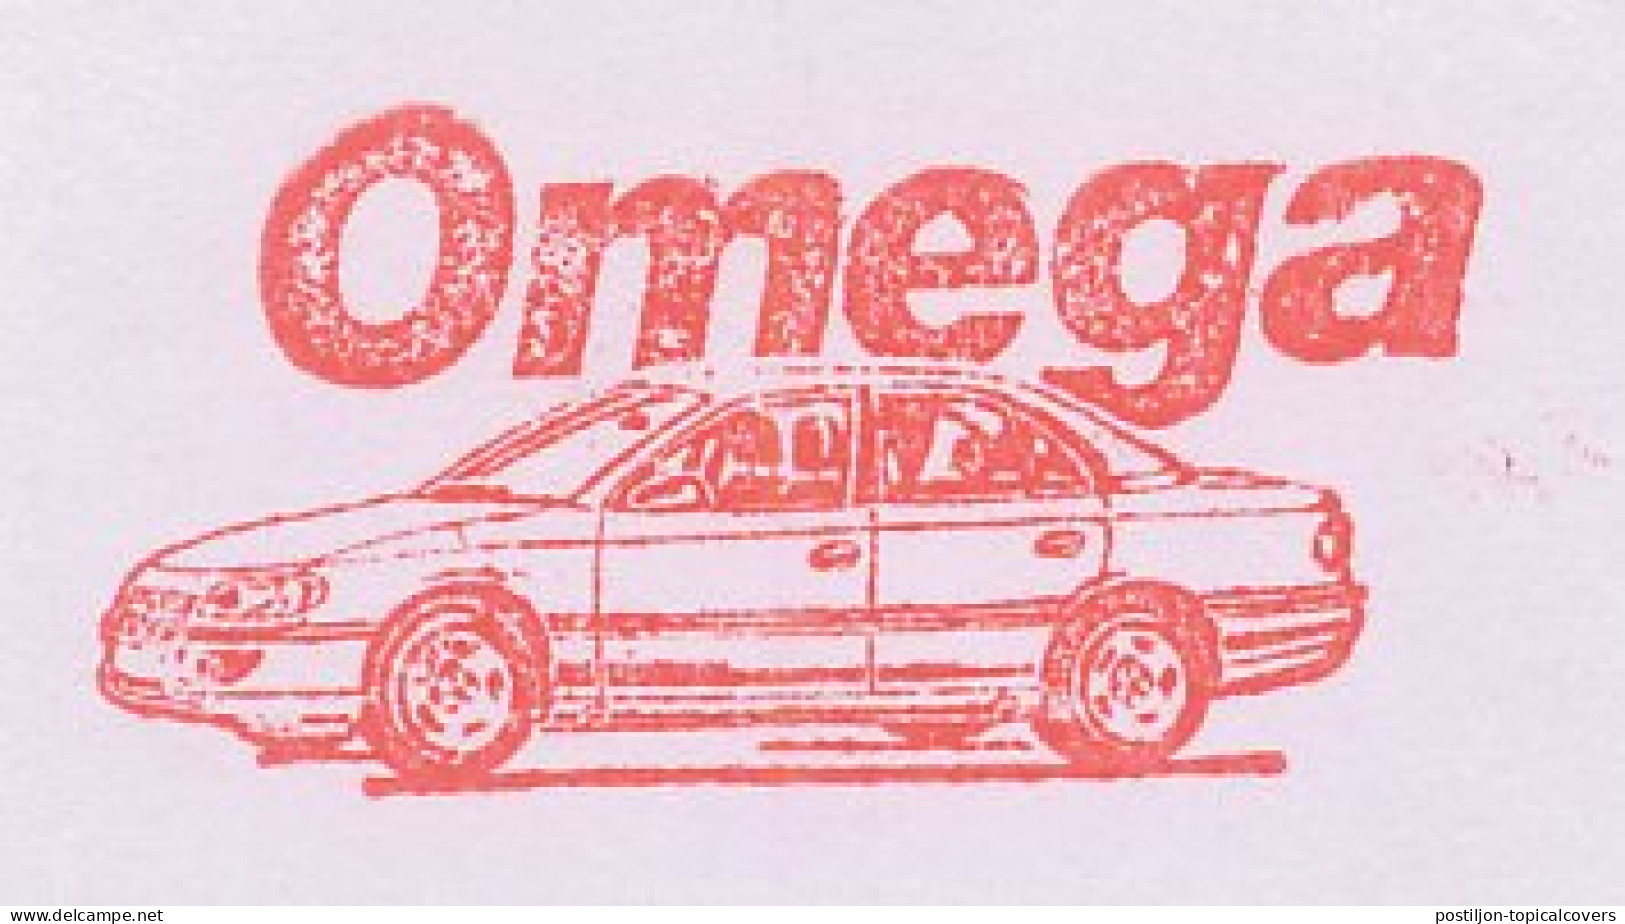 Meter Cut Germany 1995 Car - Opel Omega - Voitures